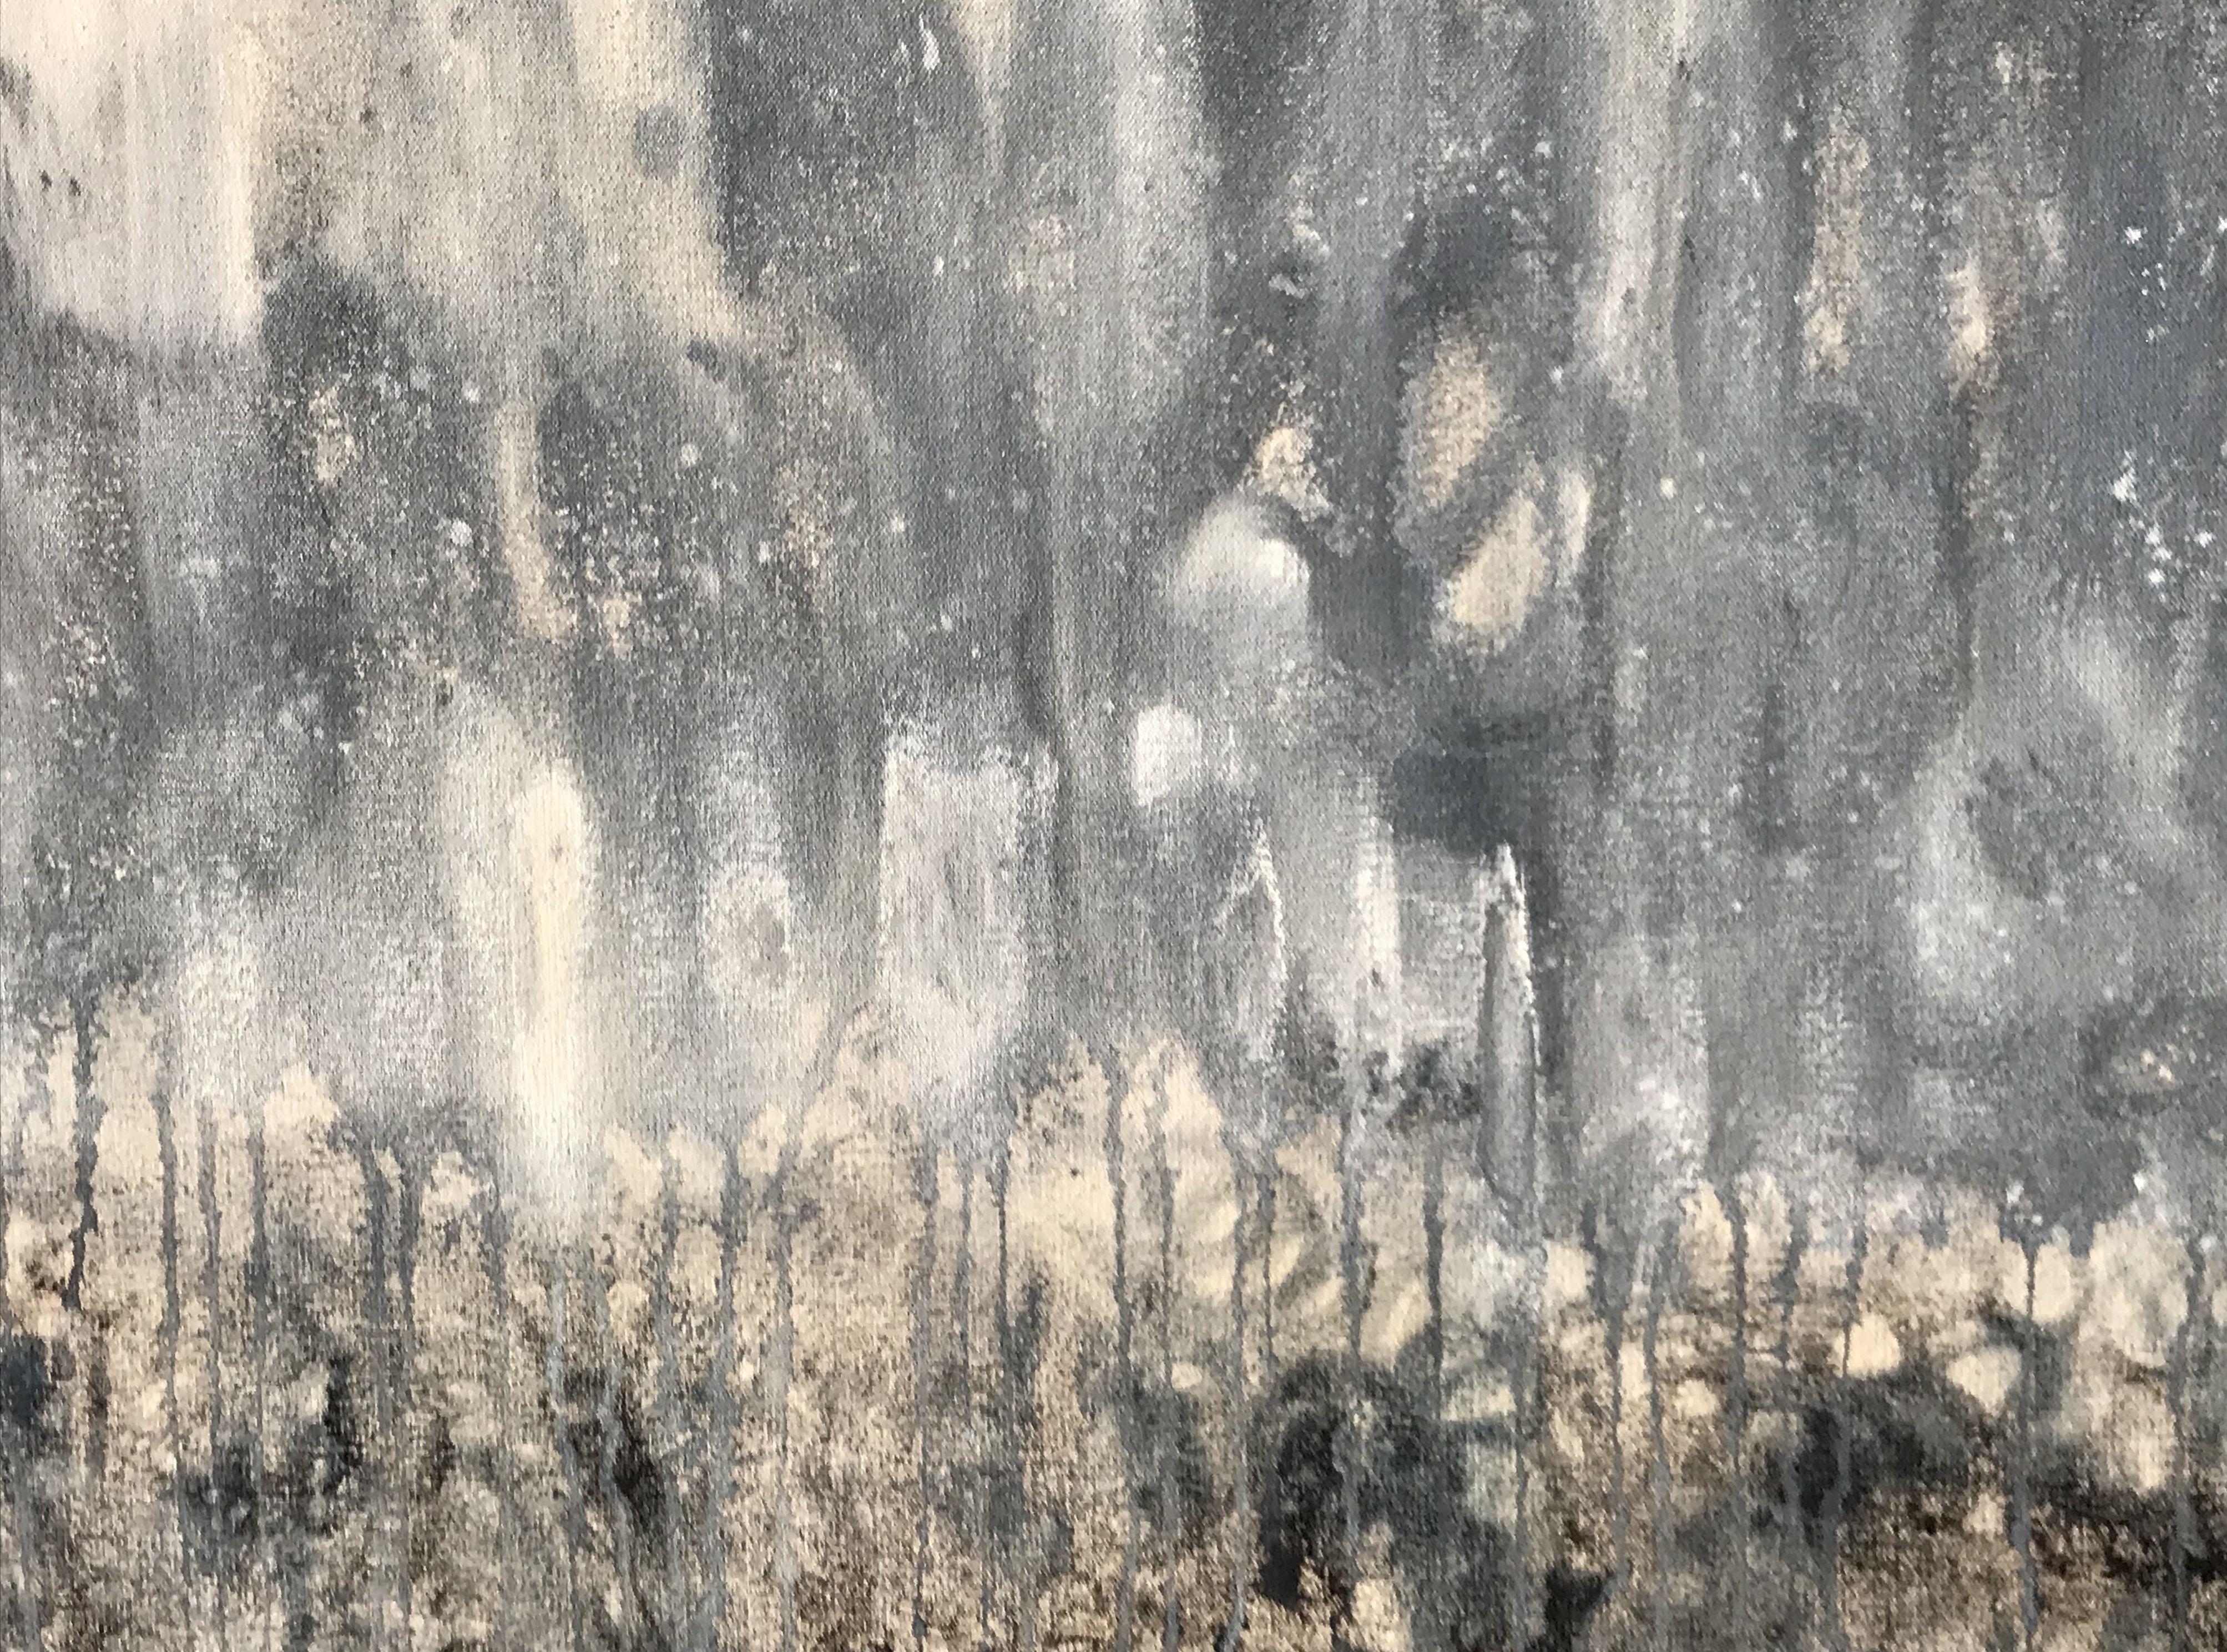 Voices, Painting, Acrylic on Canvas - Gray Abstract Painting by Patty Beaton